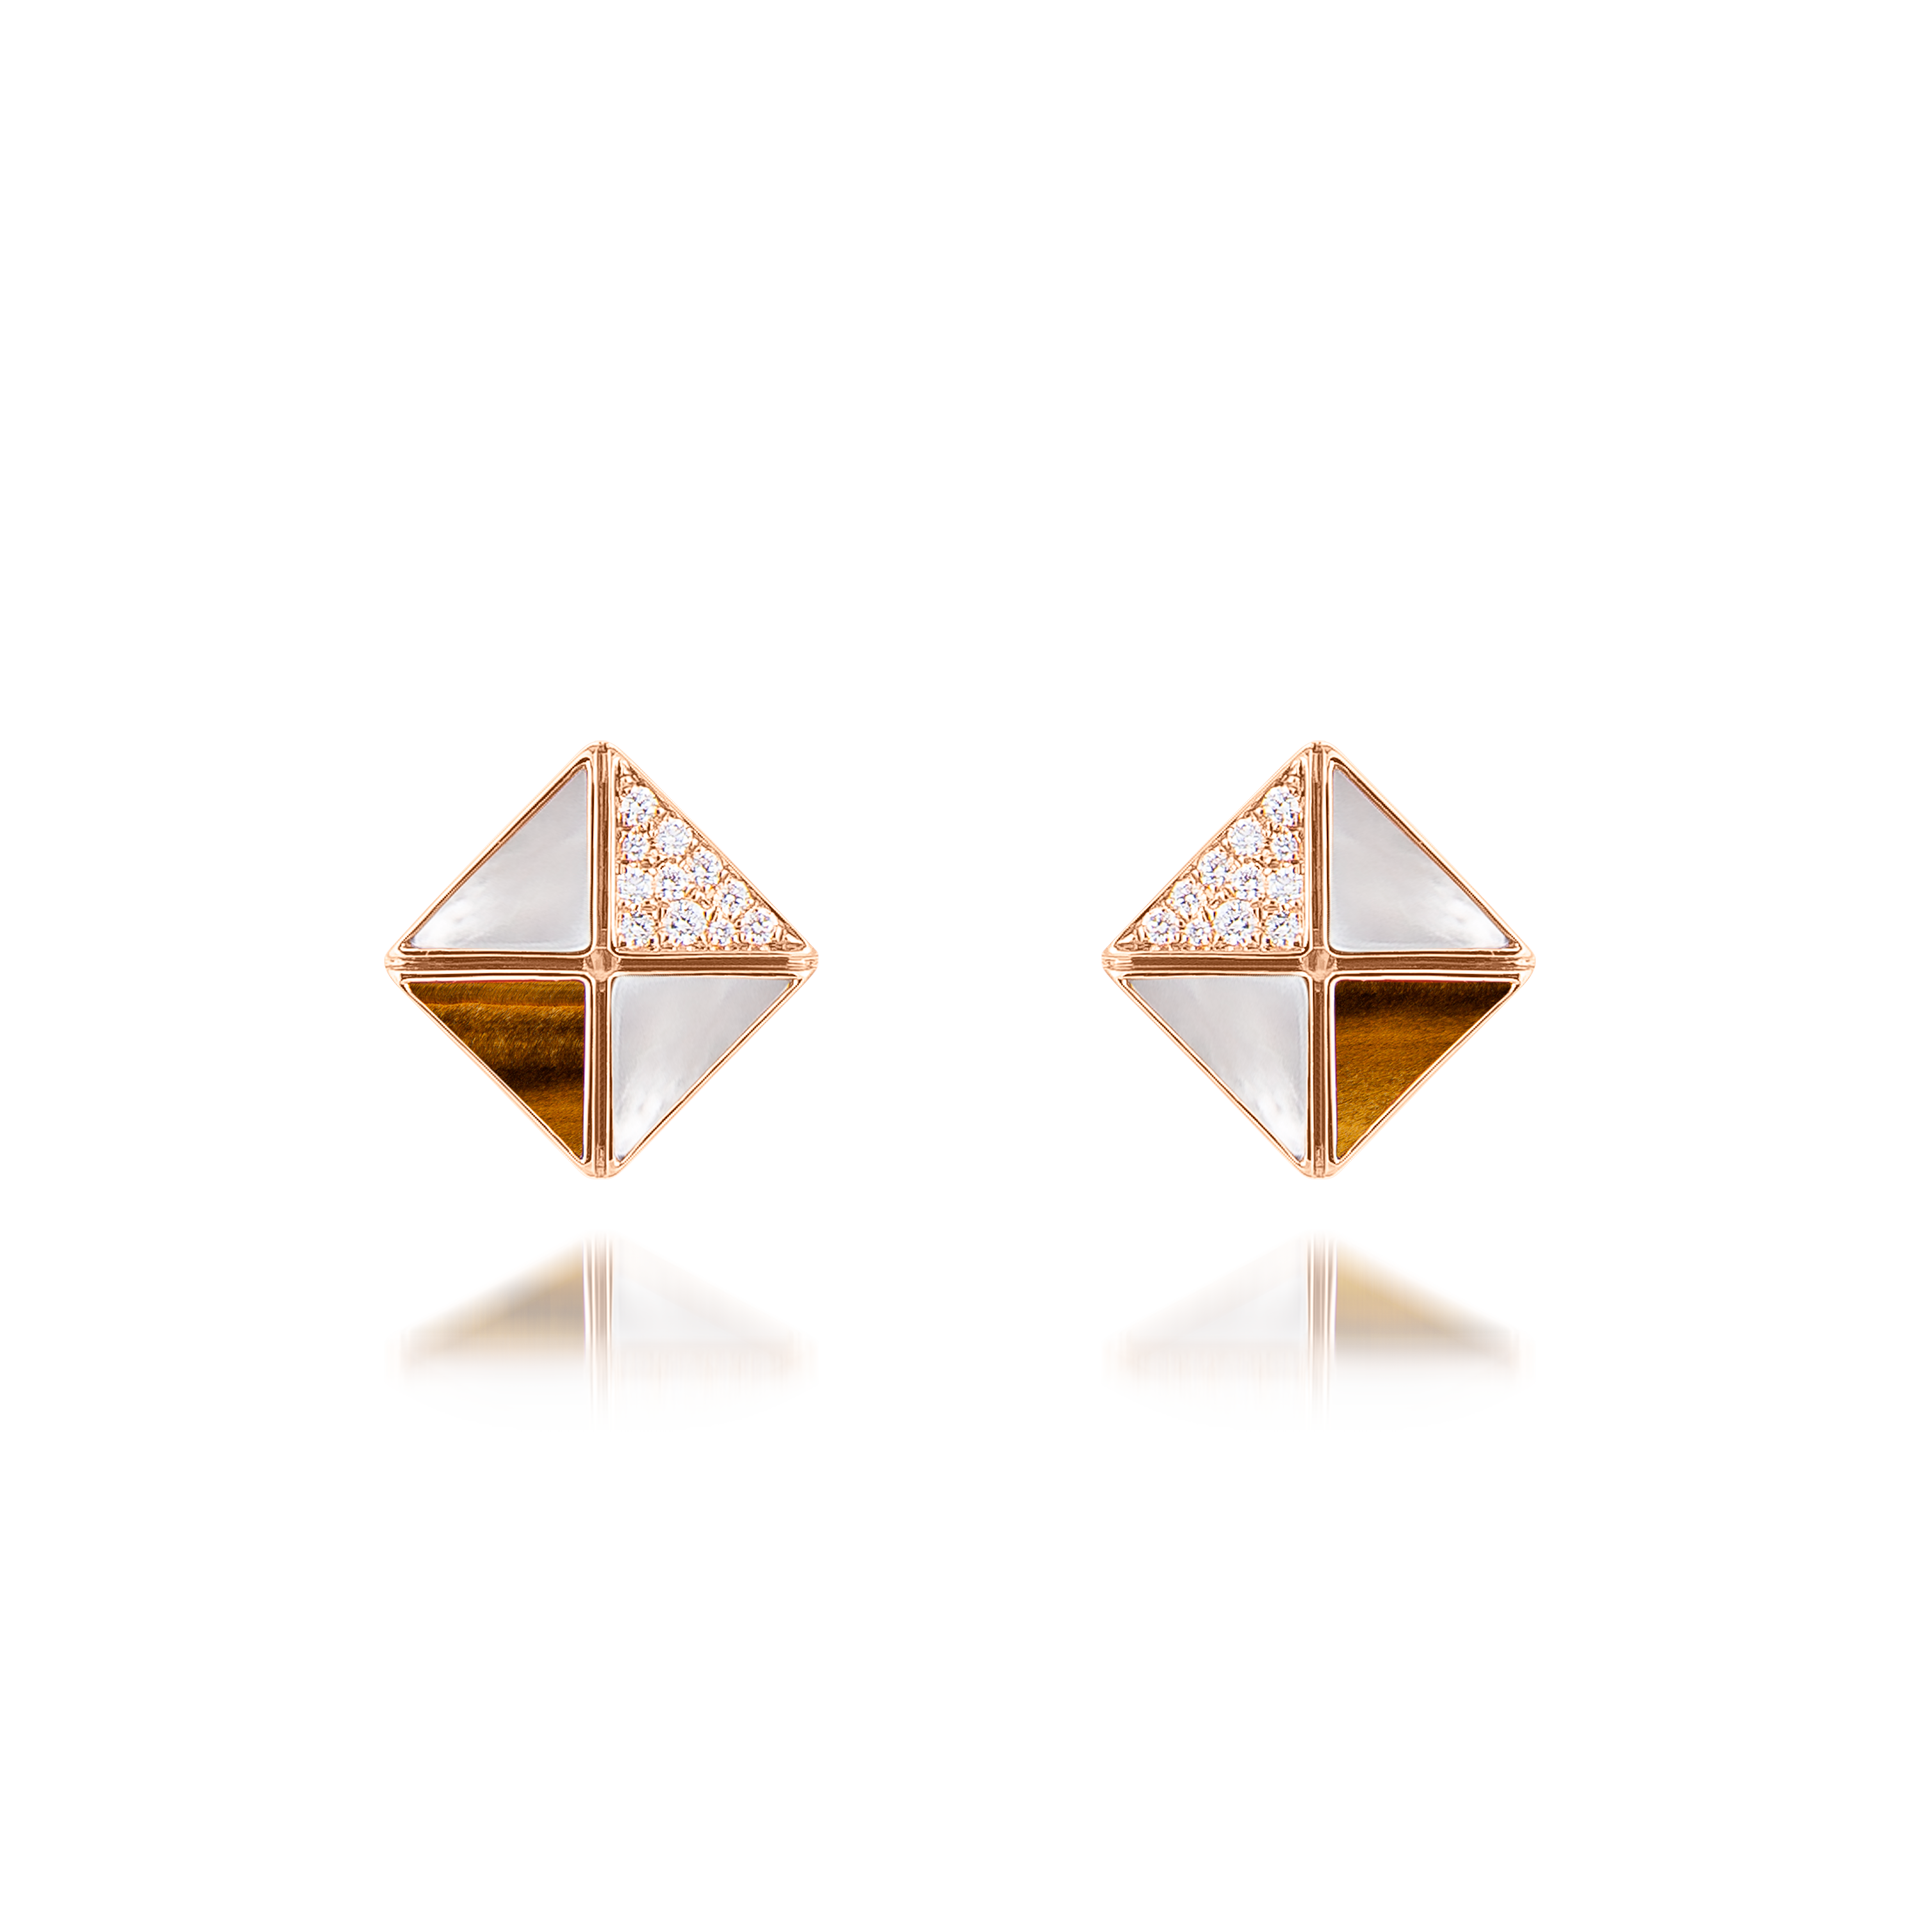 Deco Quadratic Studs with Tiger Eye, White Mother of Pearl and Diamonds  In 18K Rose Gold